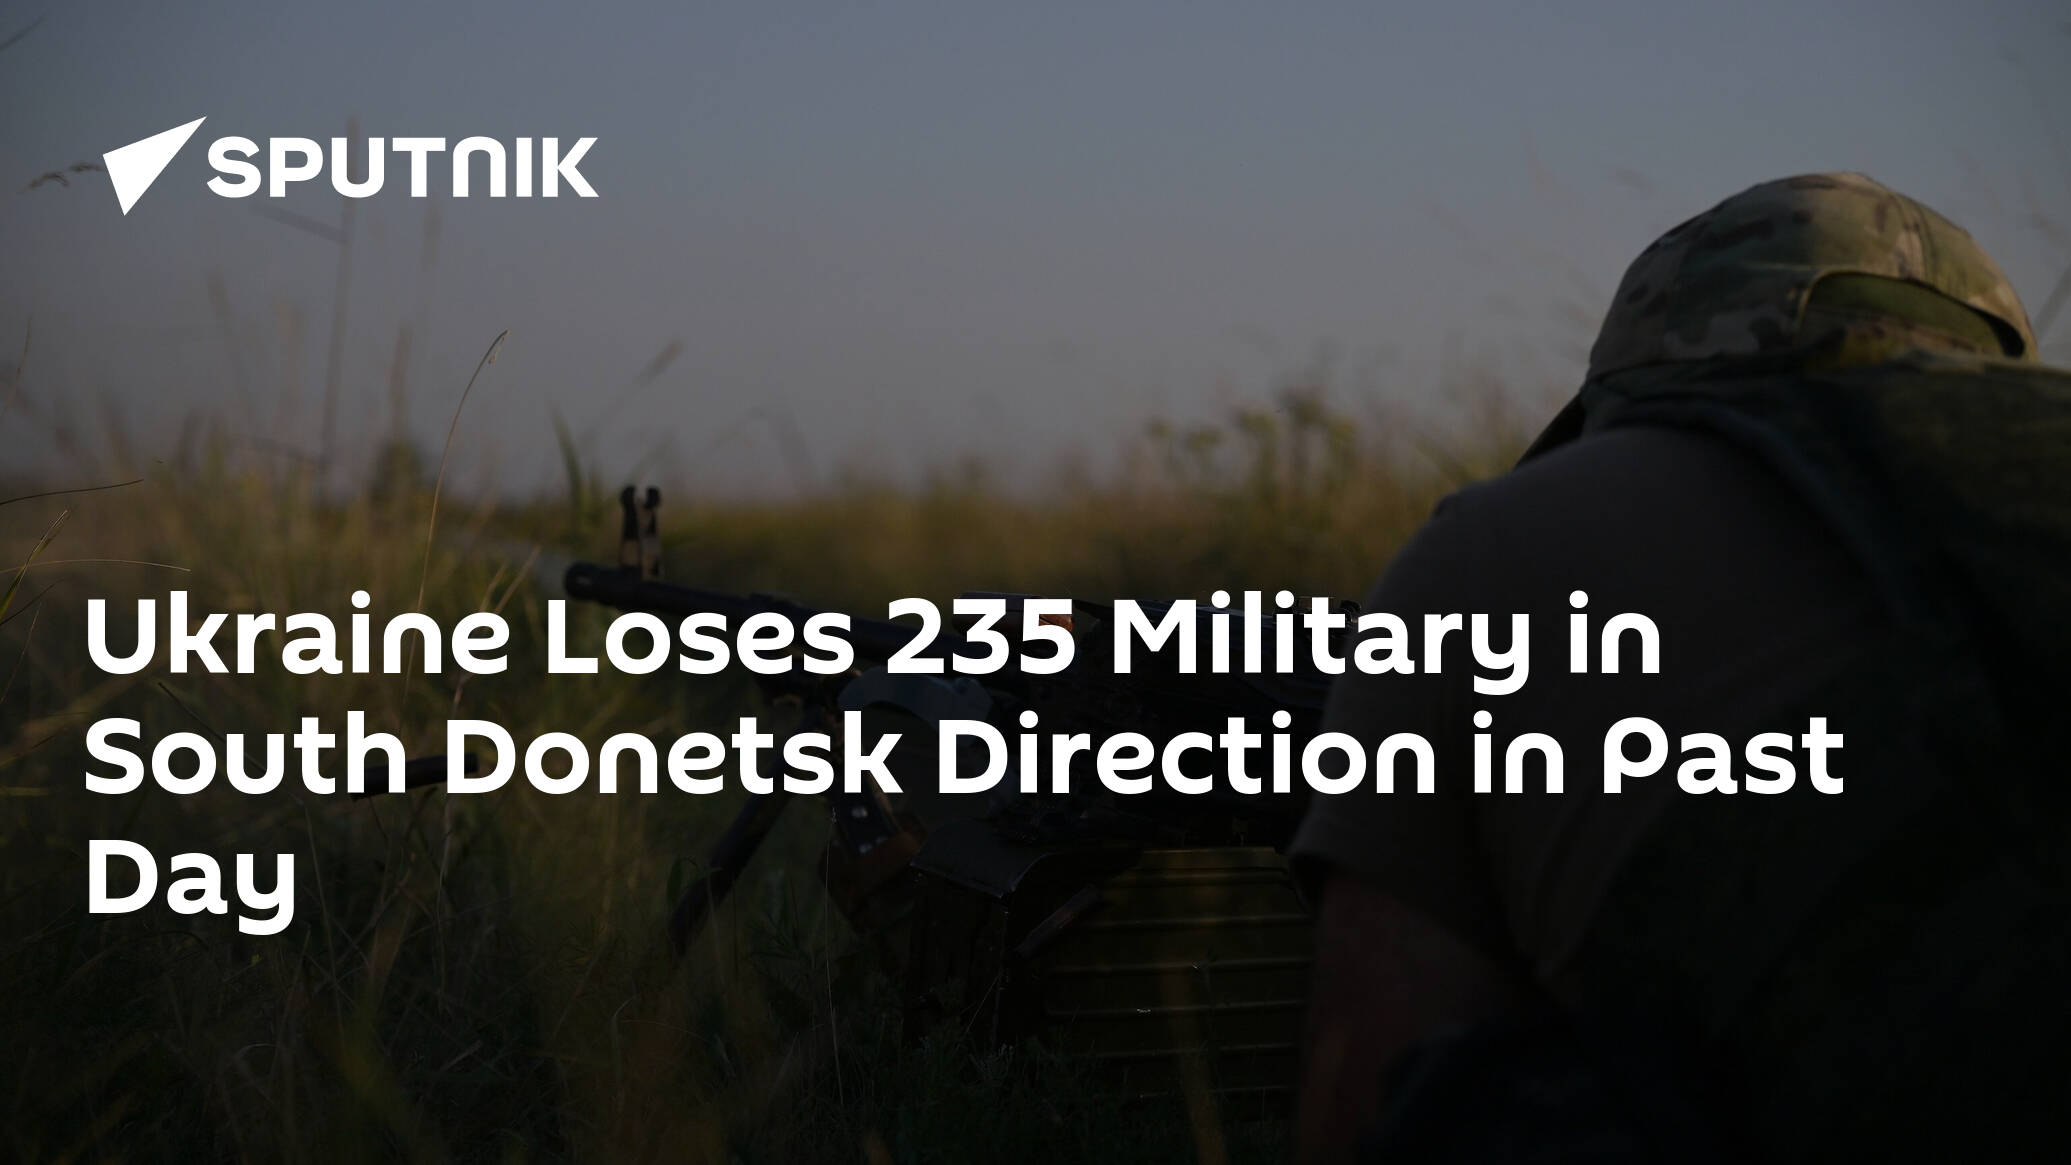 Ukraine Loses 235 Military in South Donetsk Direction in Past Day